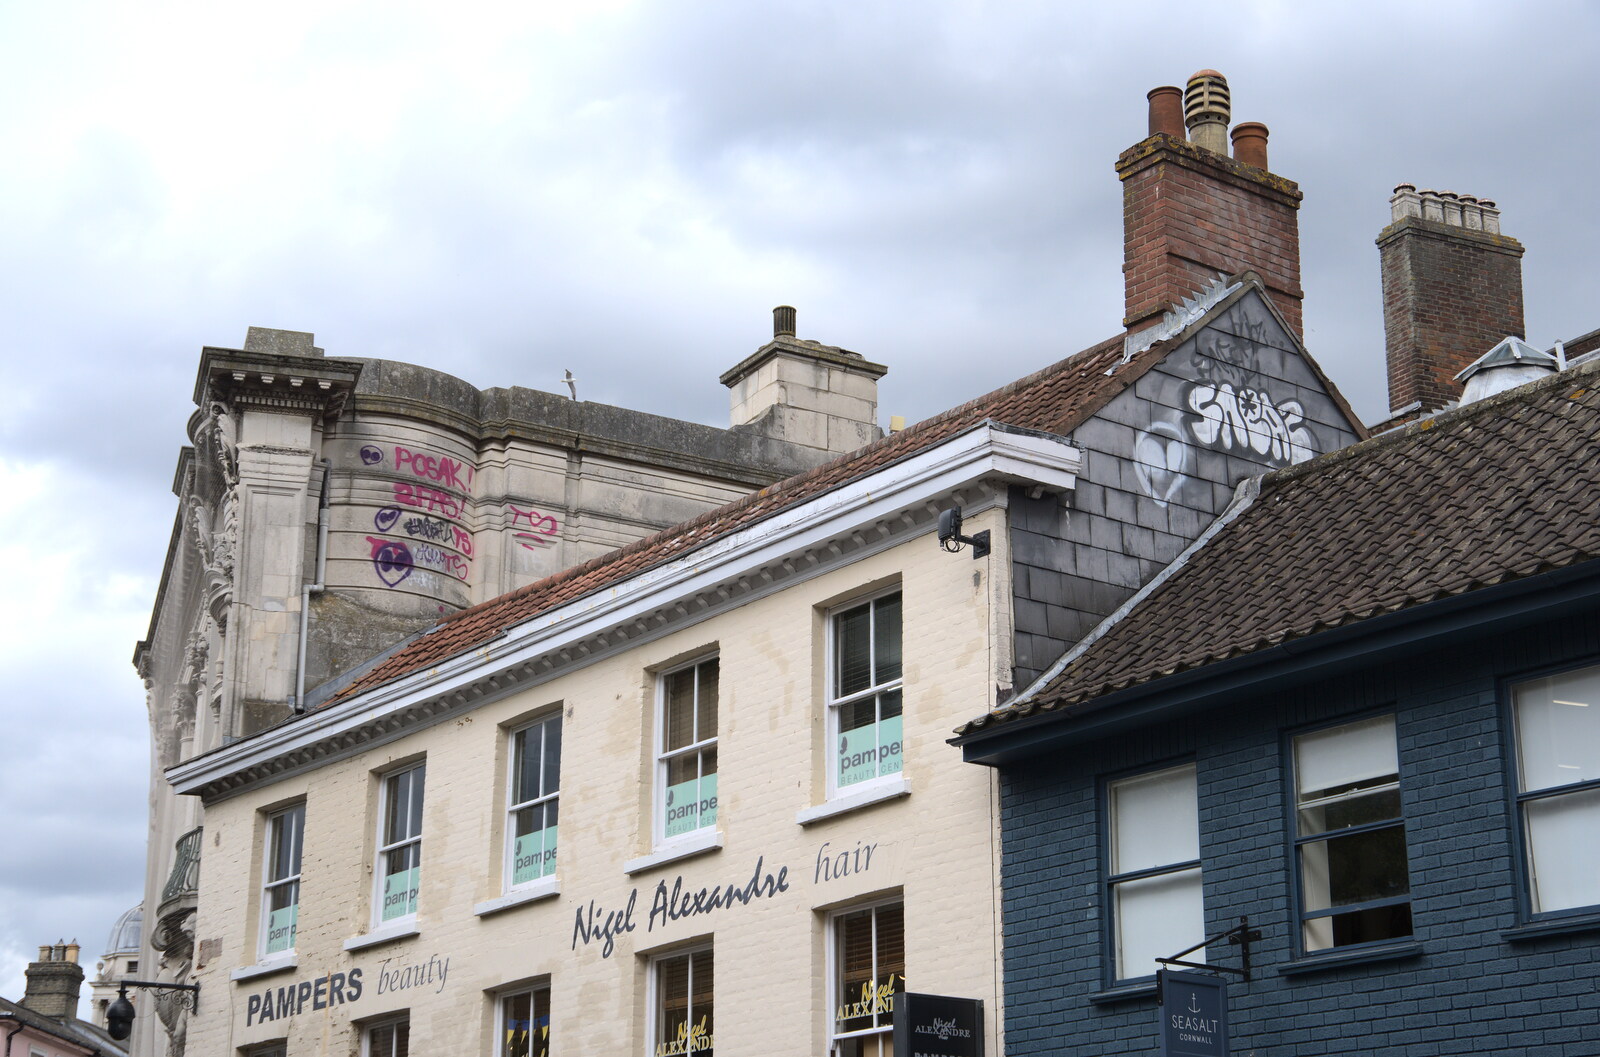 Graffiti up on the roof from The Lord Mayor's Procession, Norwich, Norfolk - 2nd July 2022